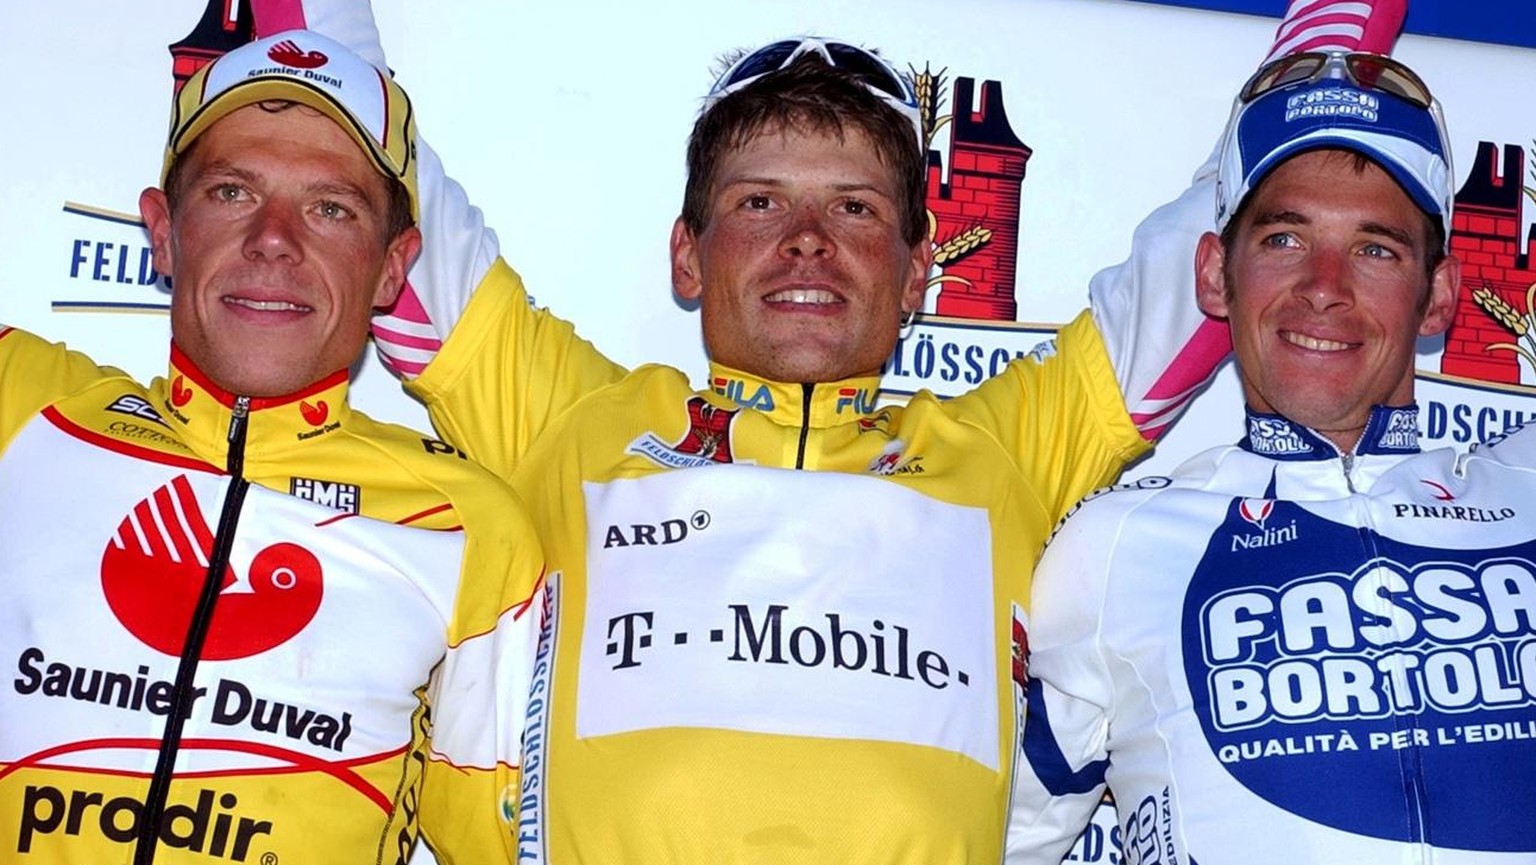 German Jan Ullrich, centre, overall winner of the Tour de Suisse cycling race, Swiss Fabian Jeker, left, second in the overall ranking and Dario David Cioni, from Italy, right, third in the overall ra ...